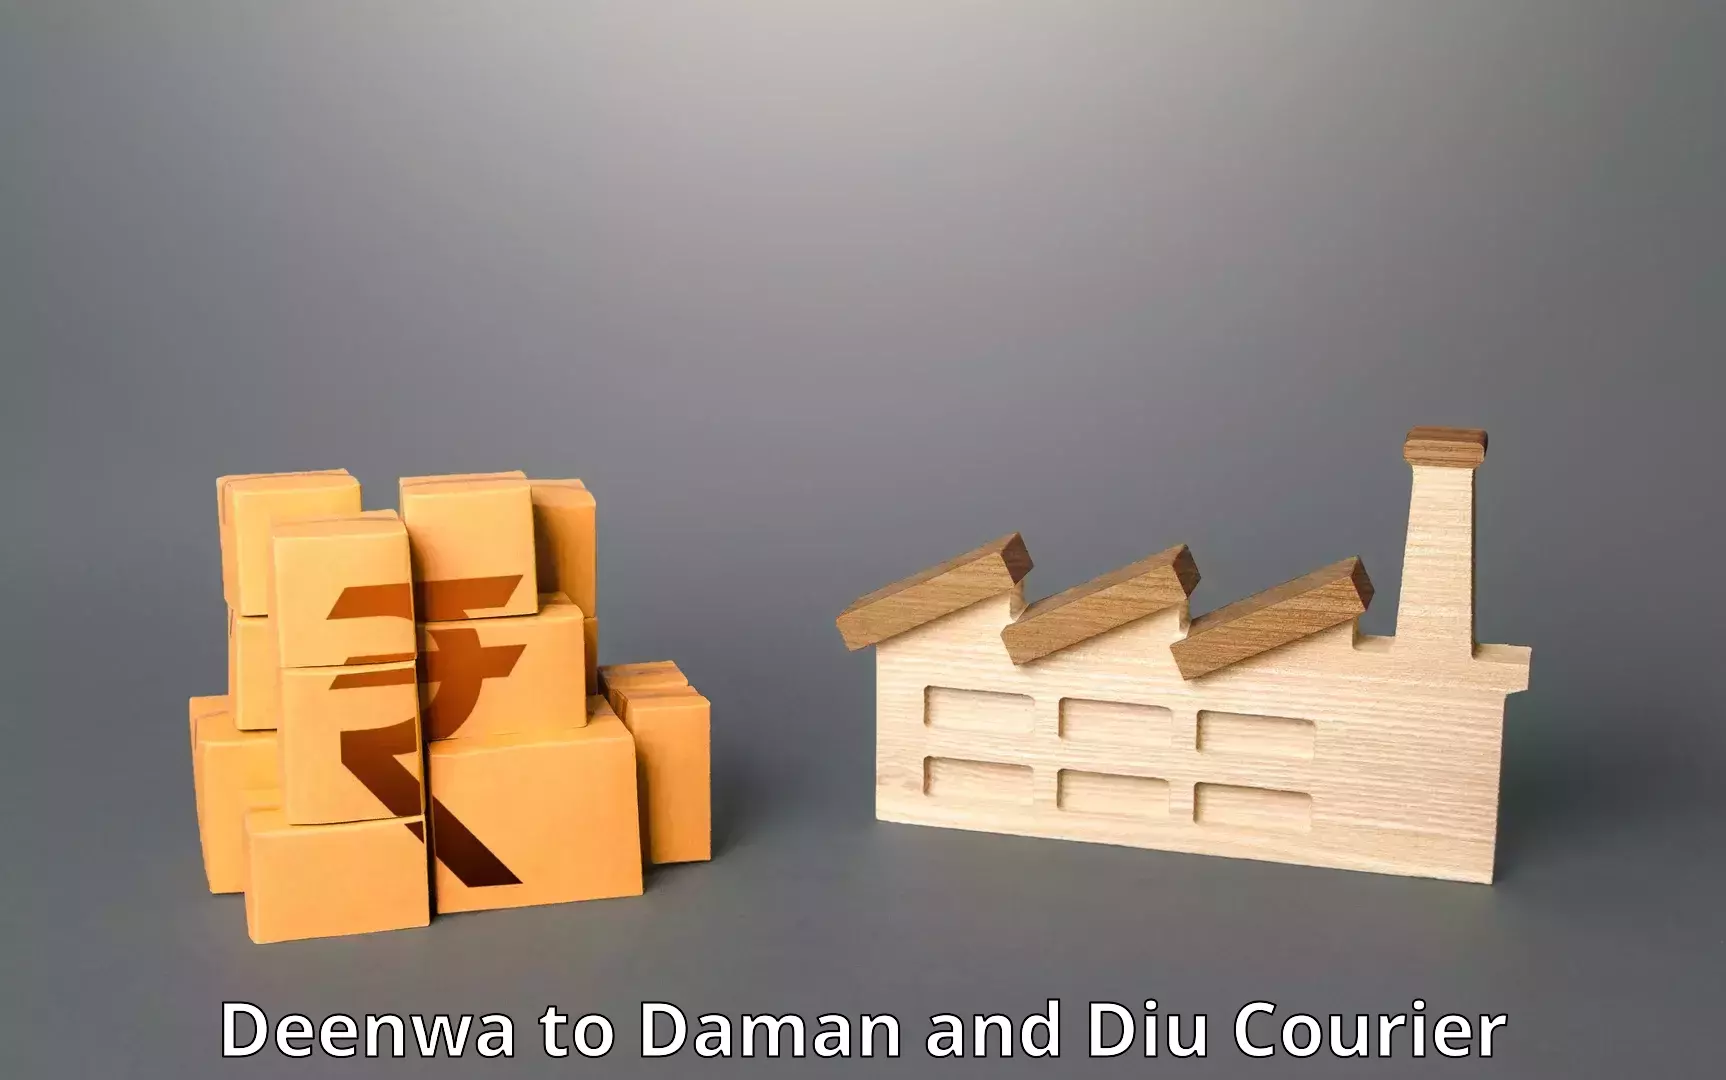 International courier networks Deenwa to Daman and Diu